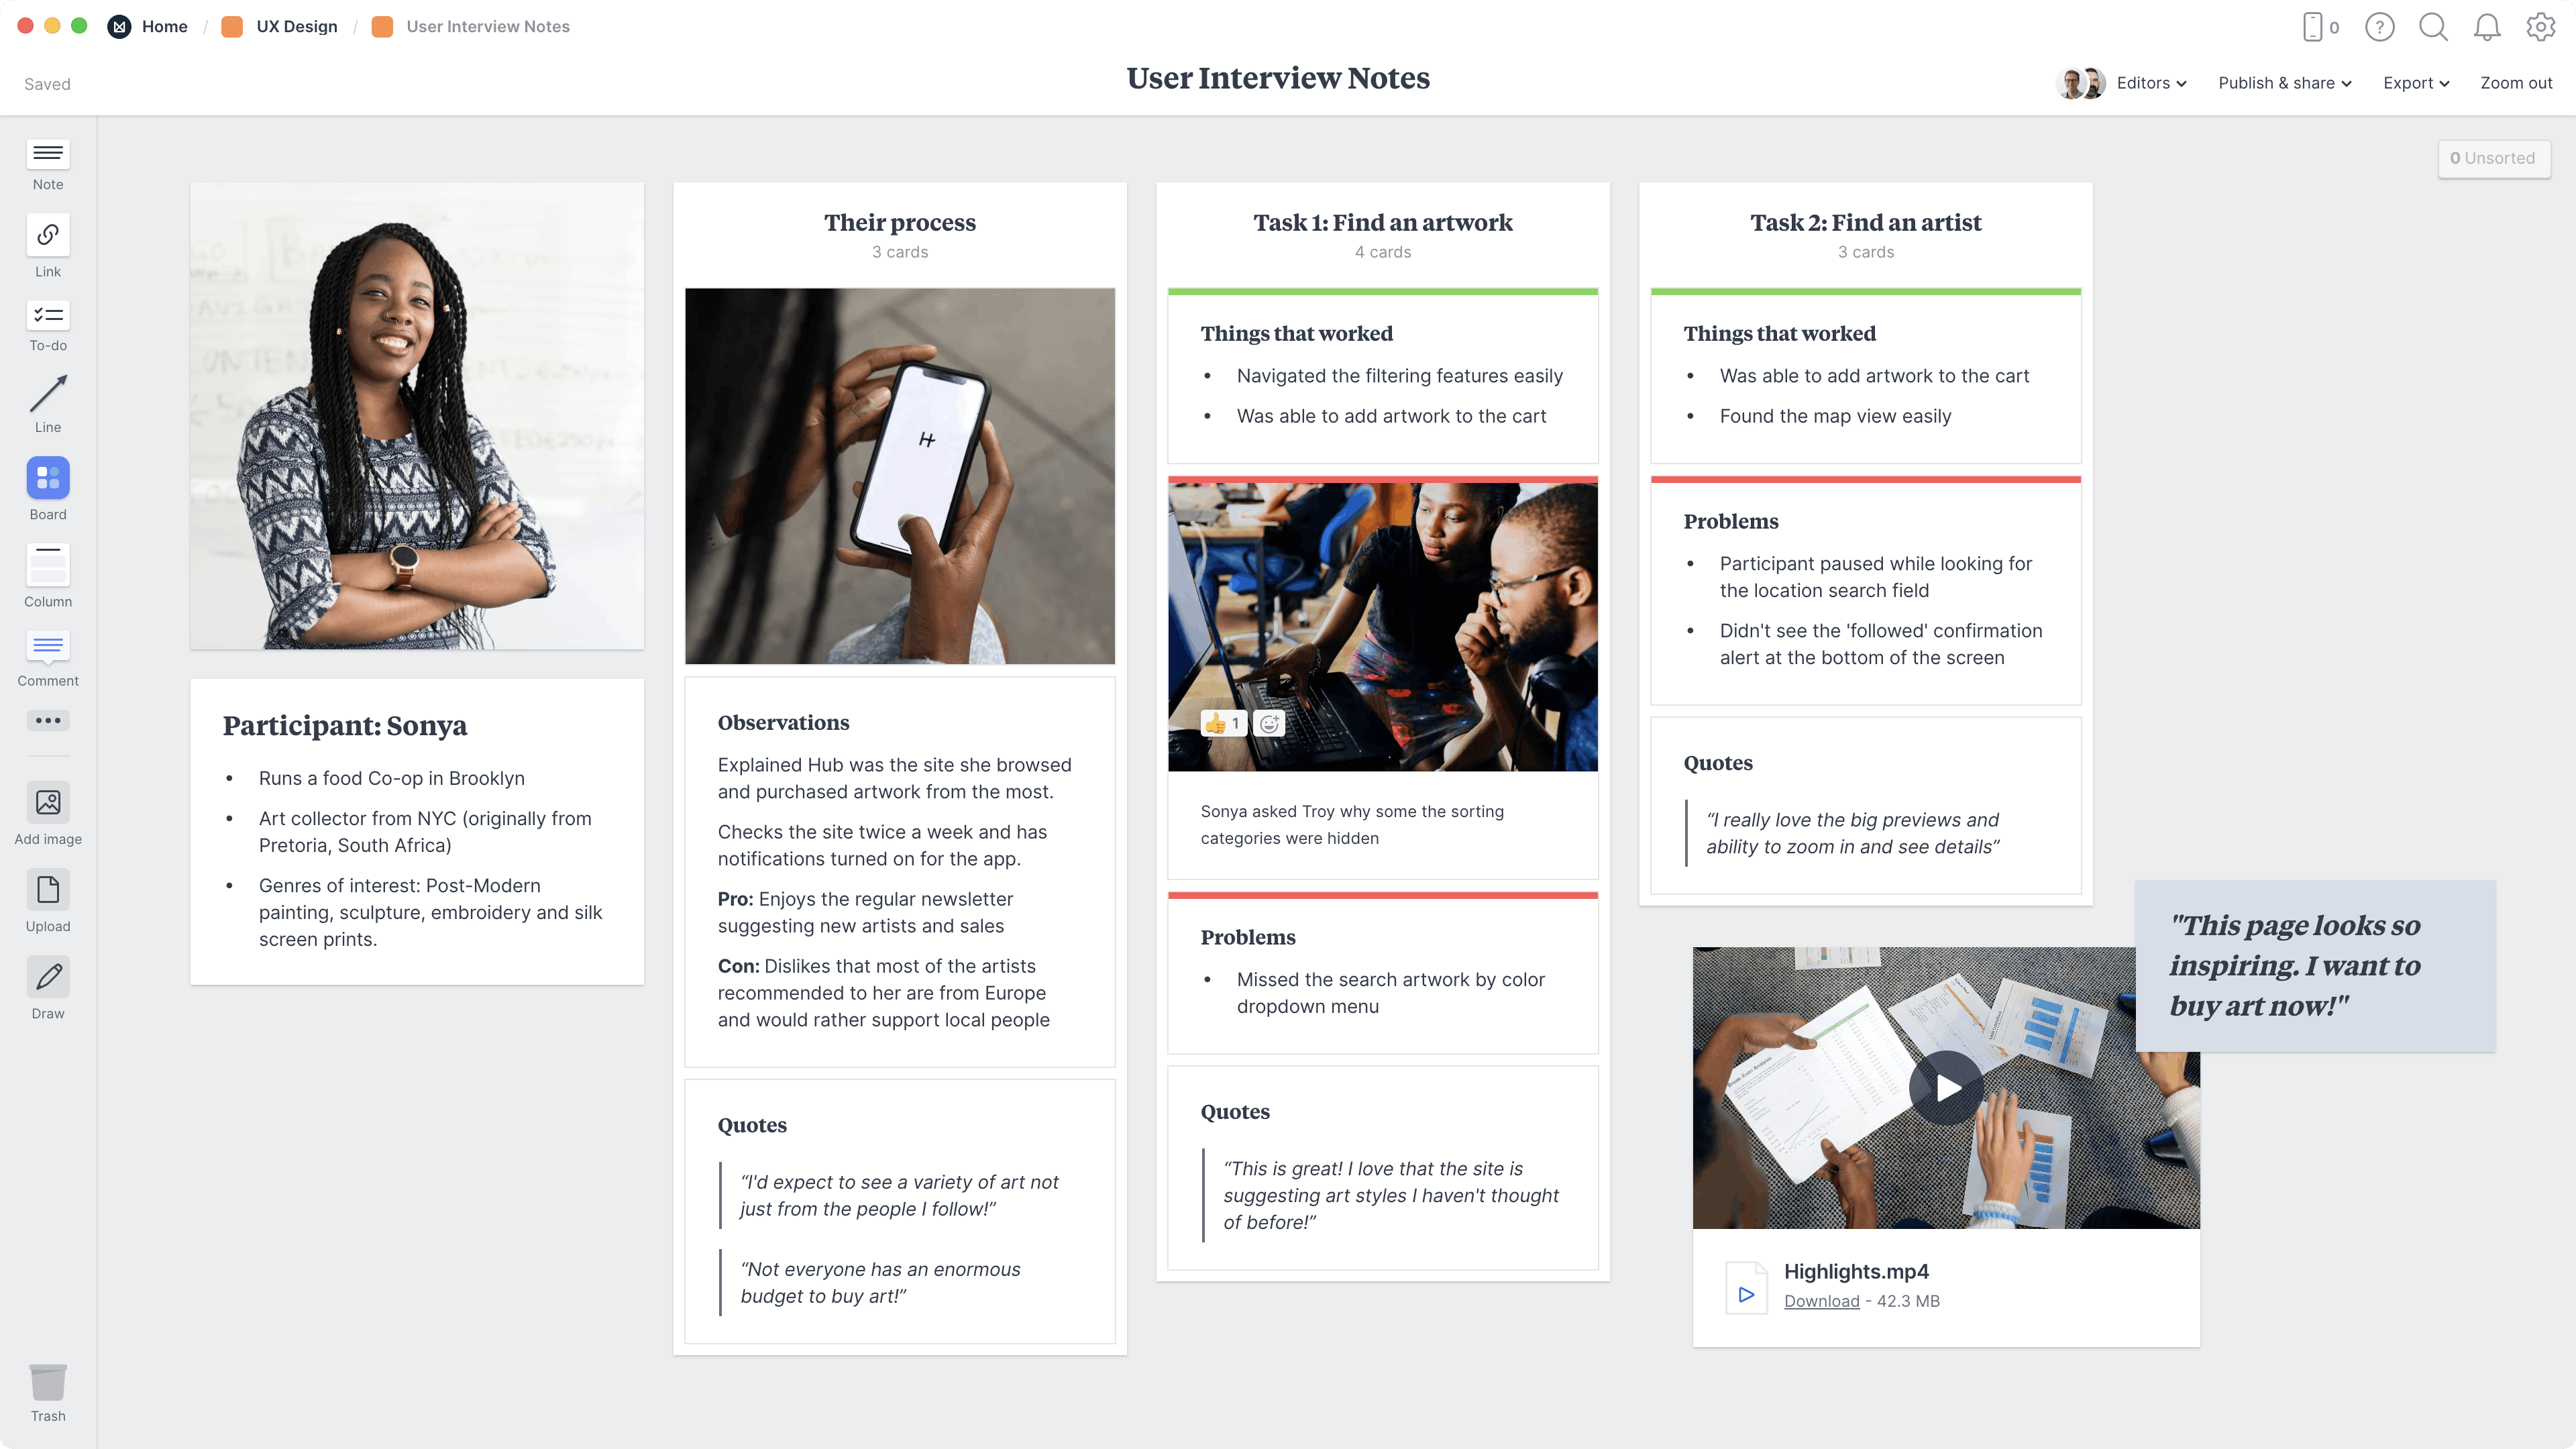 User Interview Notes Template, within the Milanote app